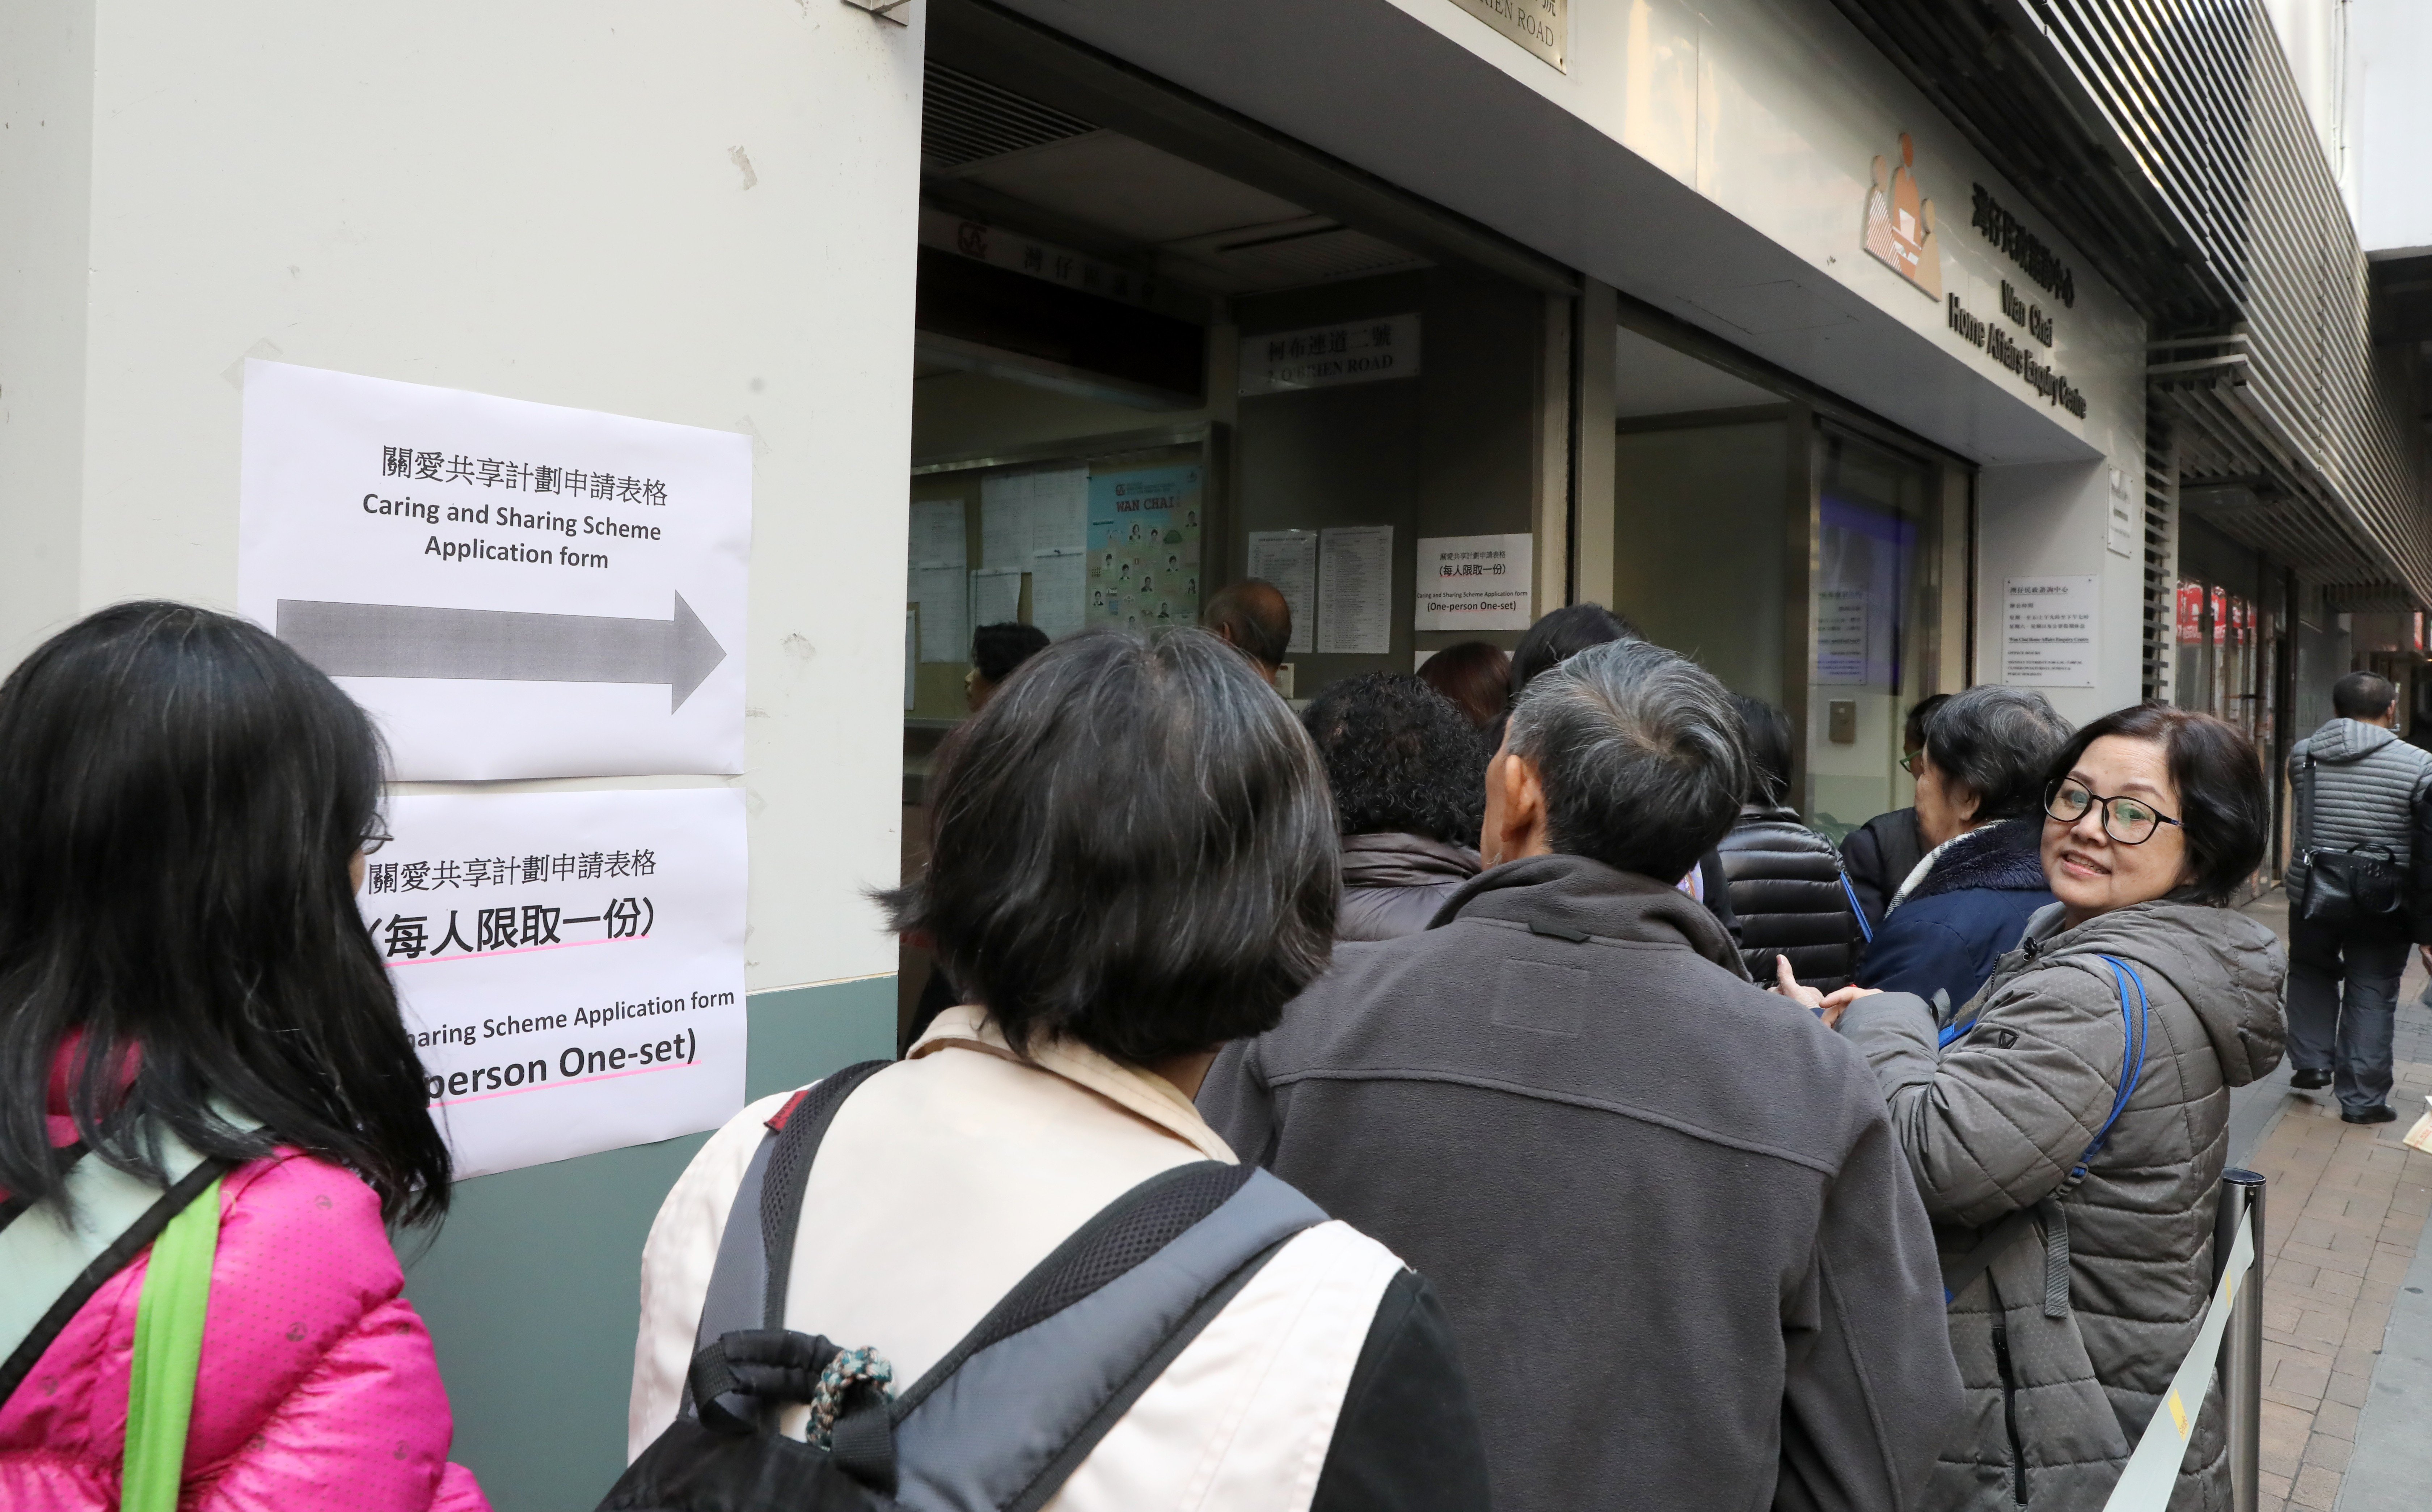 People queue up to collect Caring and Sharing Scheme application forms, at the Wan Chai Home Affairs inquiry Centre in January. Applications closed on April 30. Photo: K.Y. Cheng